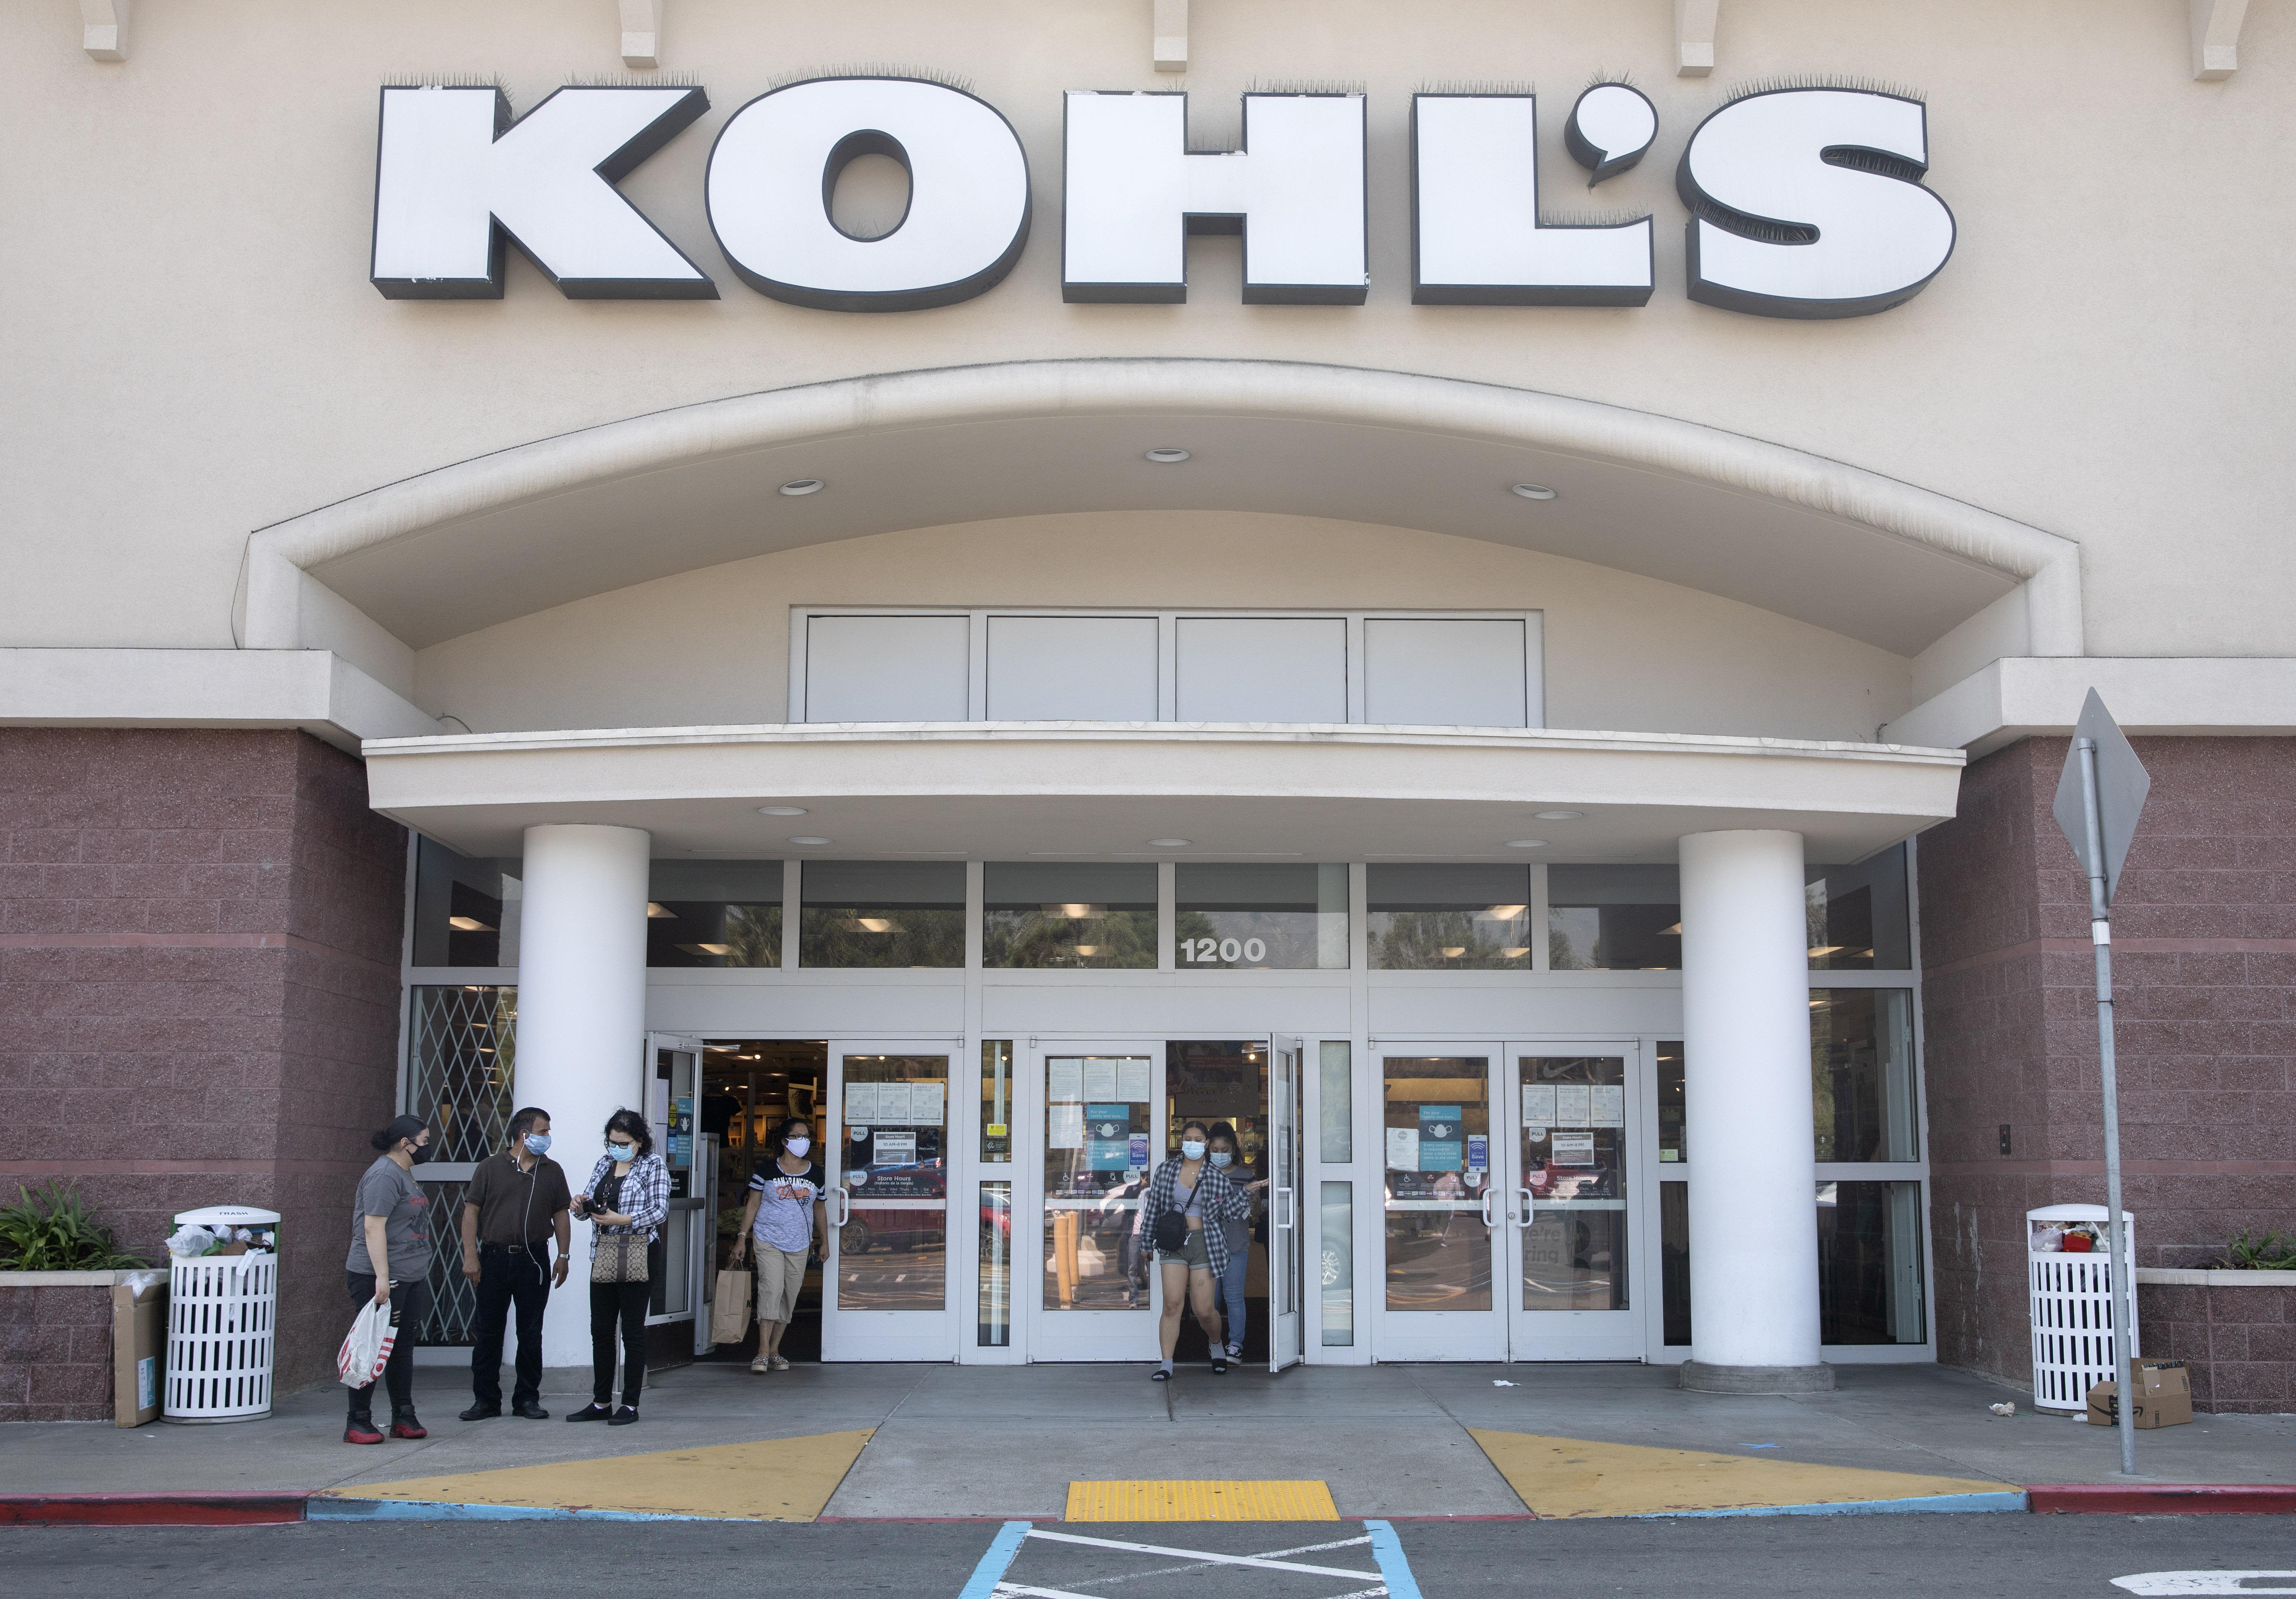 Kohl's Earnings: Signs of Progress Despite Difficult Economic Conditions;  Shares Very Undervalued